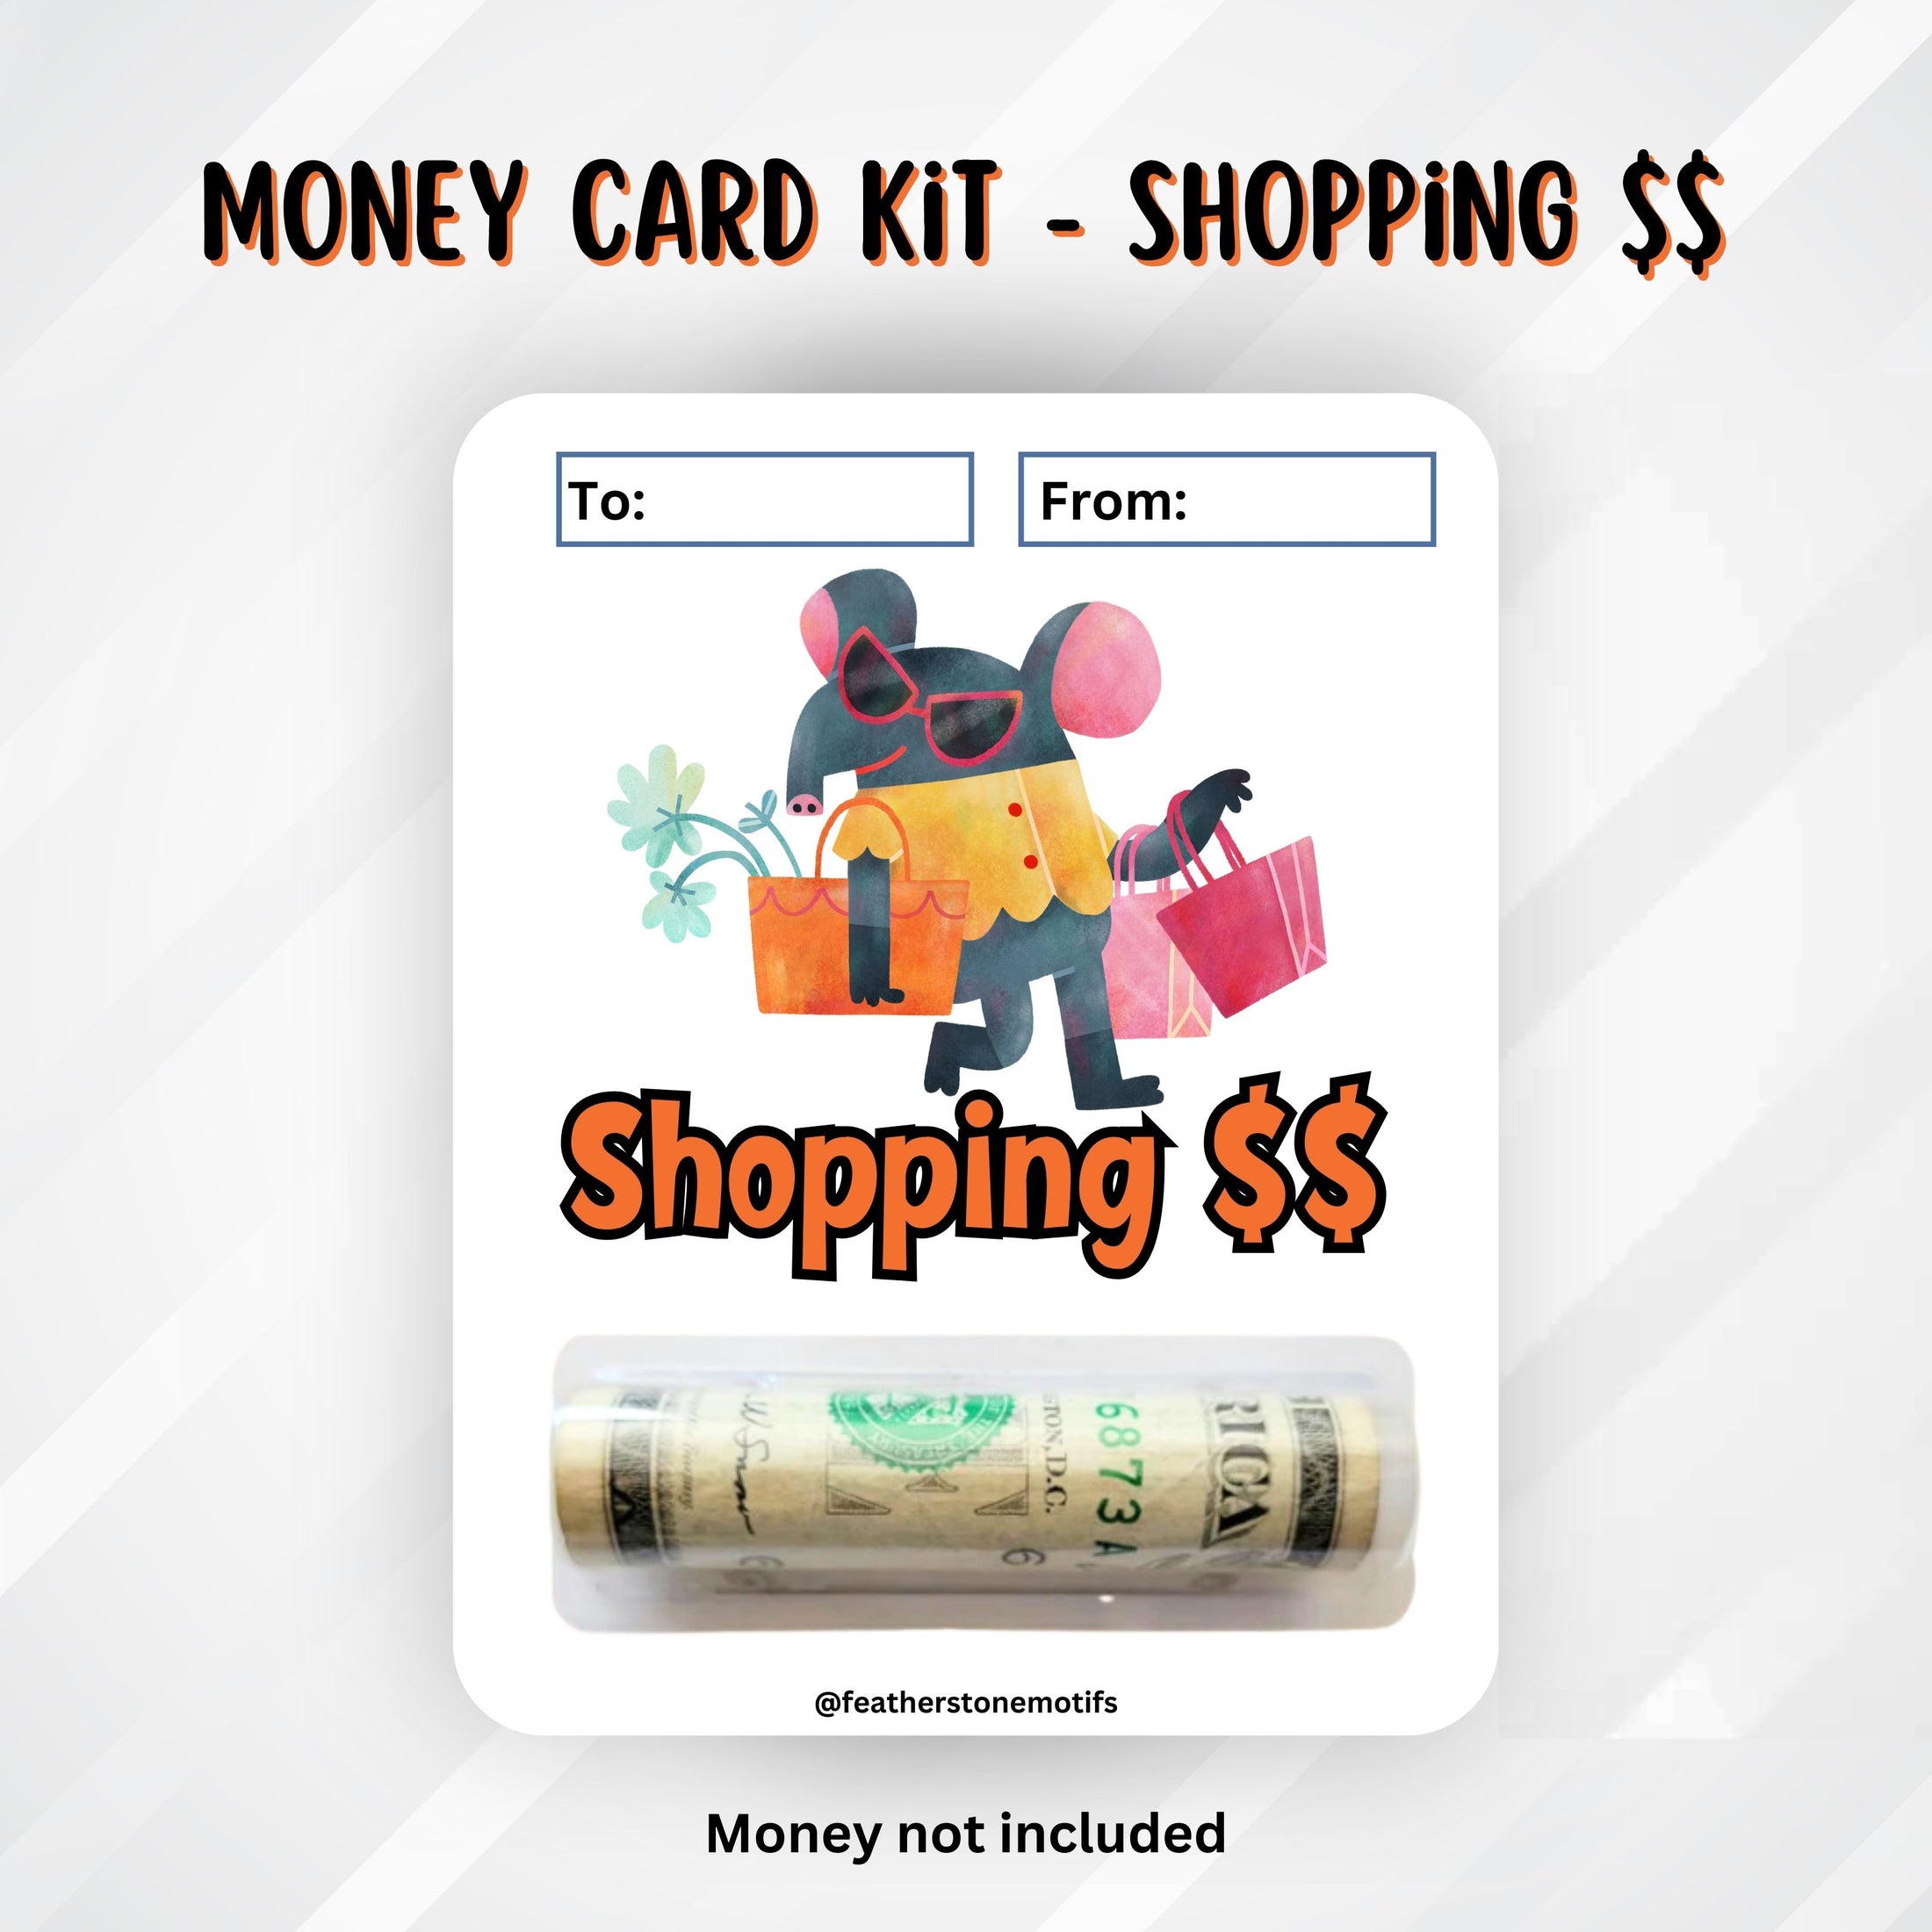 This image shows the money card attached to the Shopping $$ Money Card.